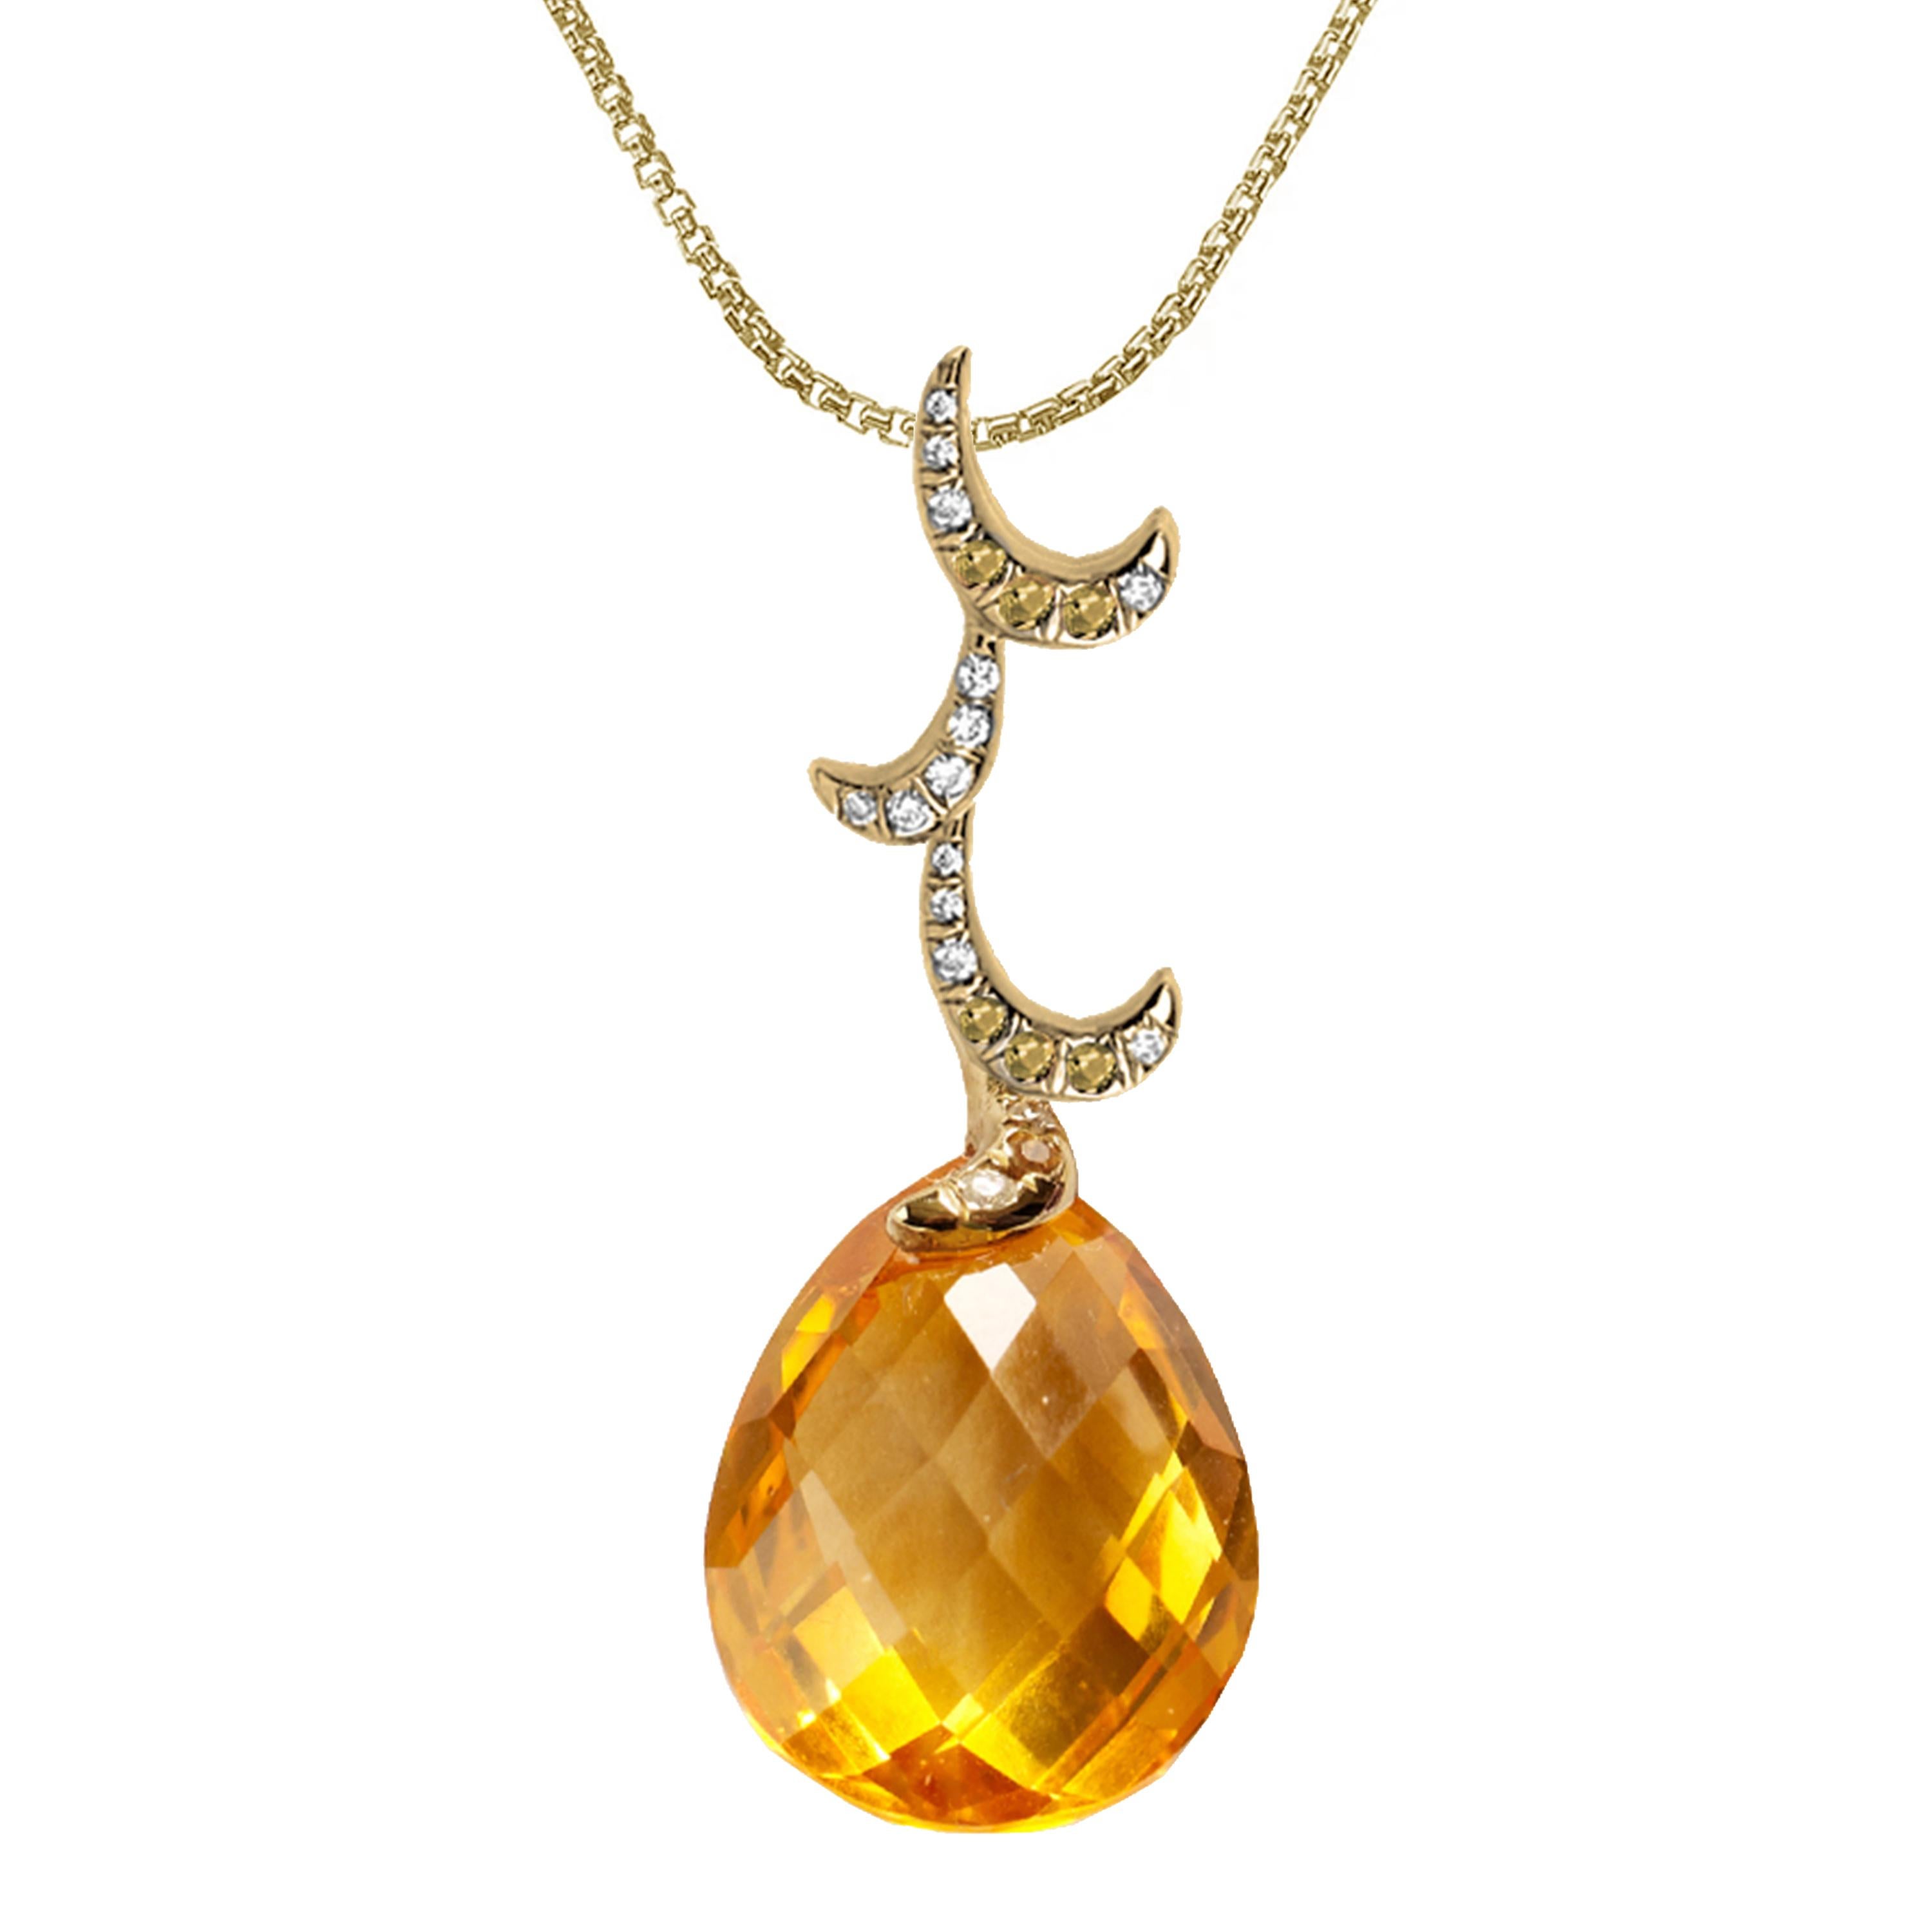 Description:
Whispering medium briolette pendant featuring a 13mm x 10mm citrine briolette and 0.10ct diamonds and 0.05ct citrines. Set in high polish 18ct yellow gold. Chain length is 16 inches.

Inspiration:
Emulating femininity and glamour, the